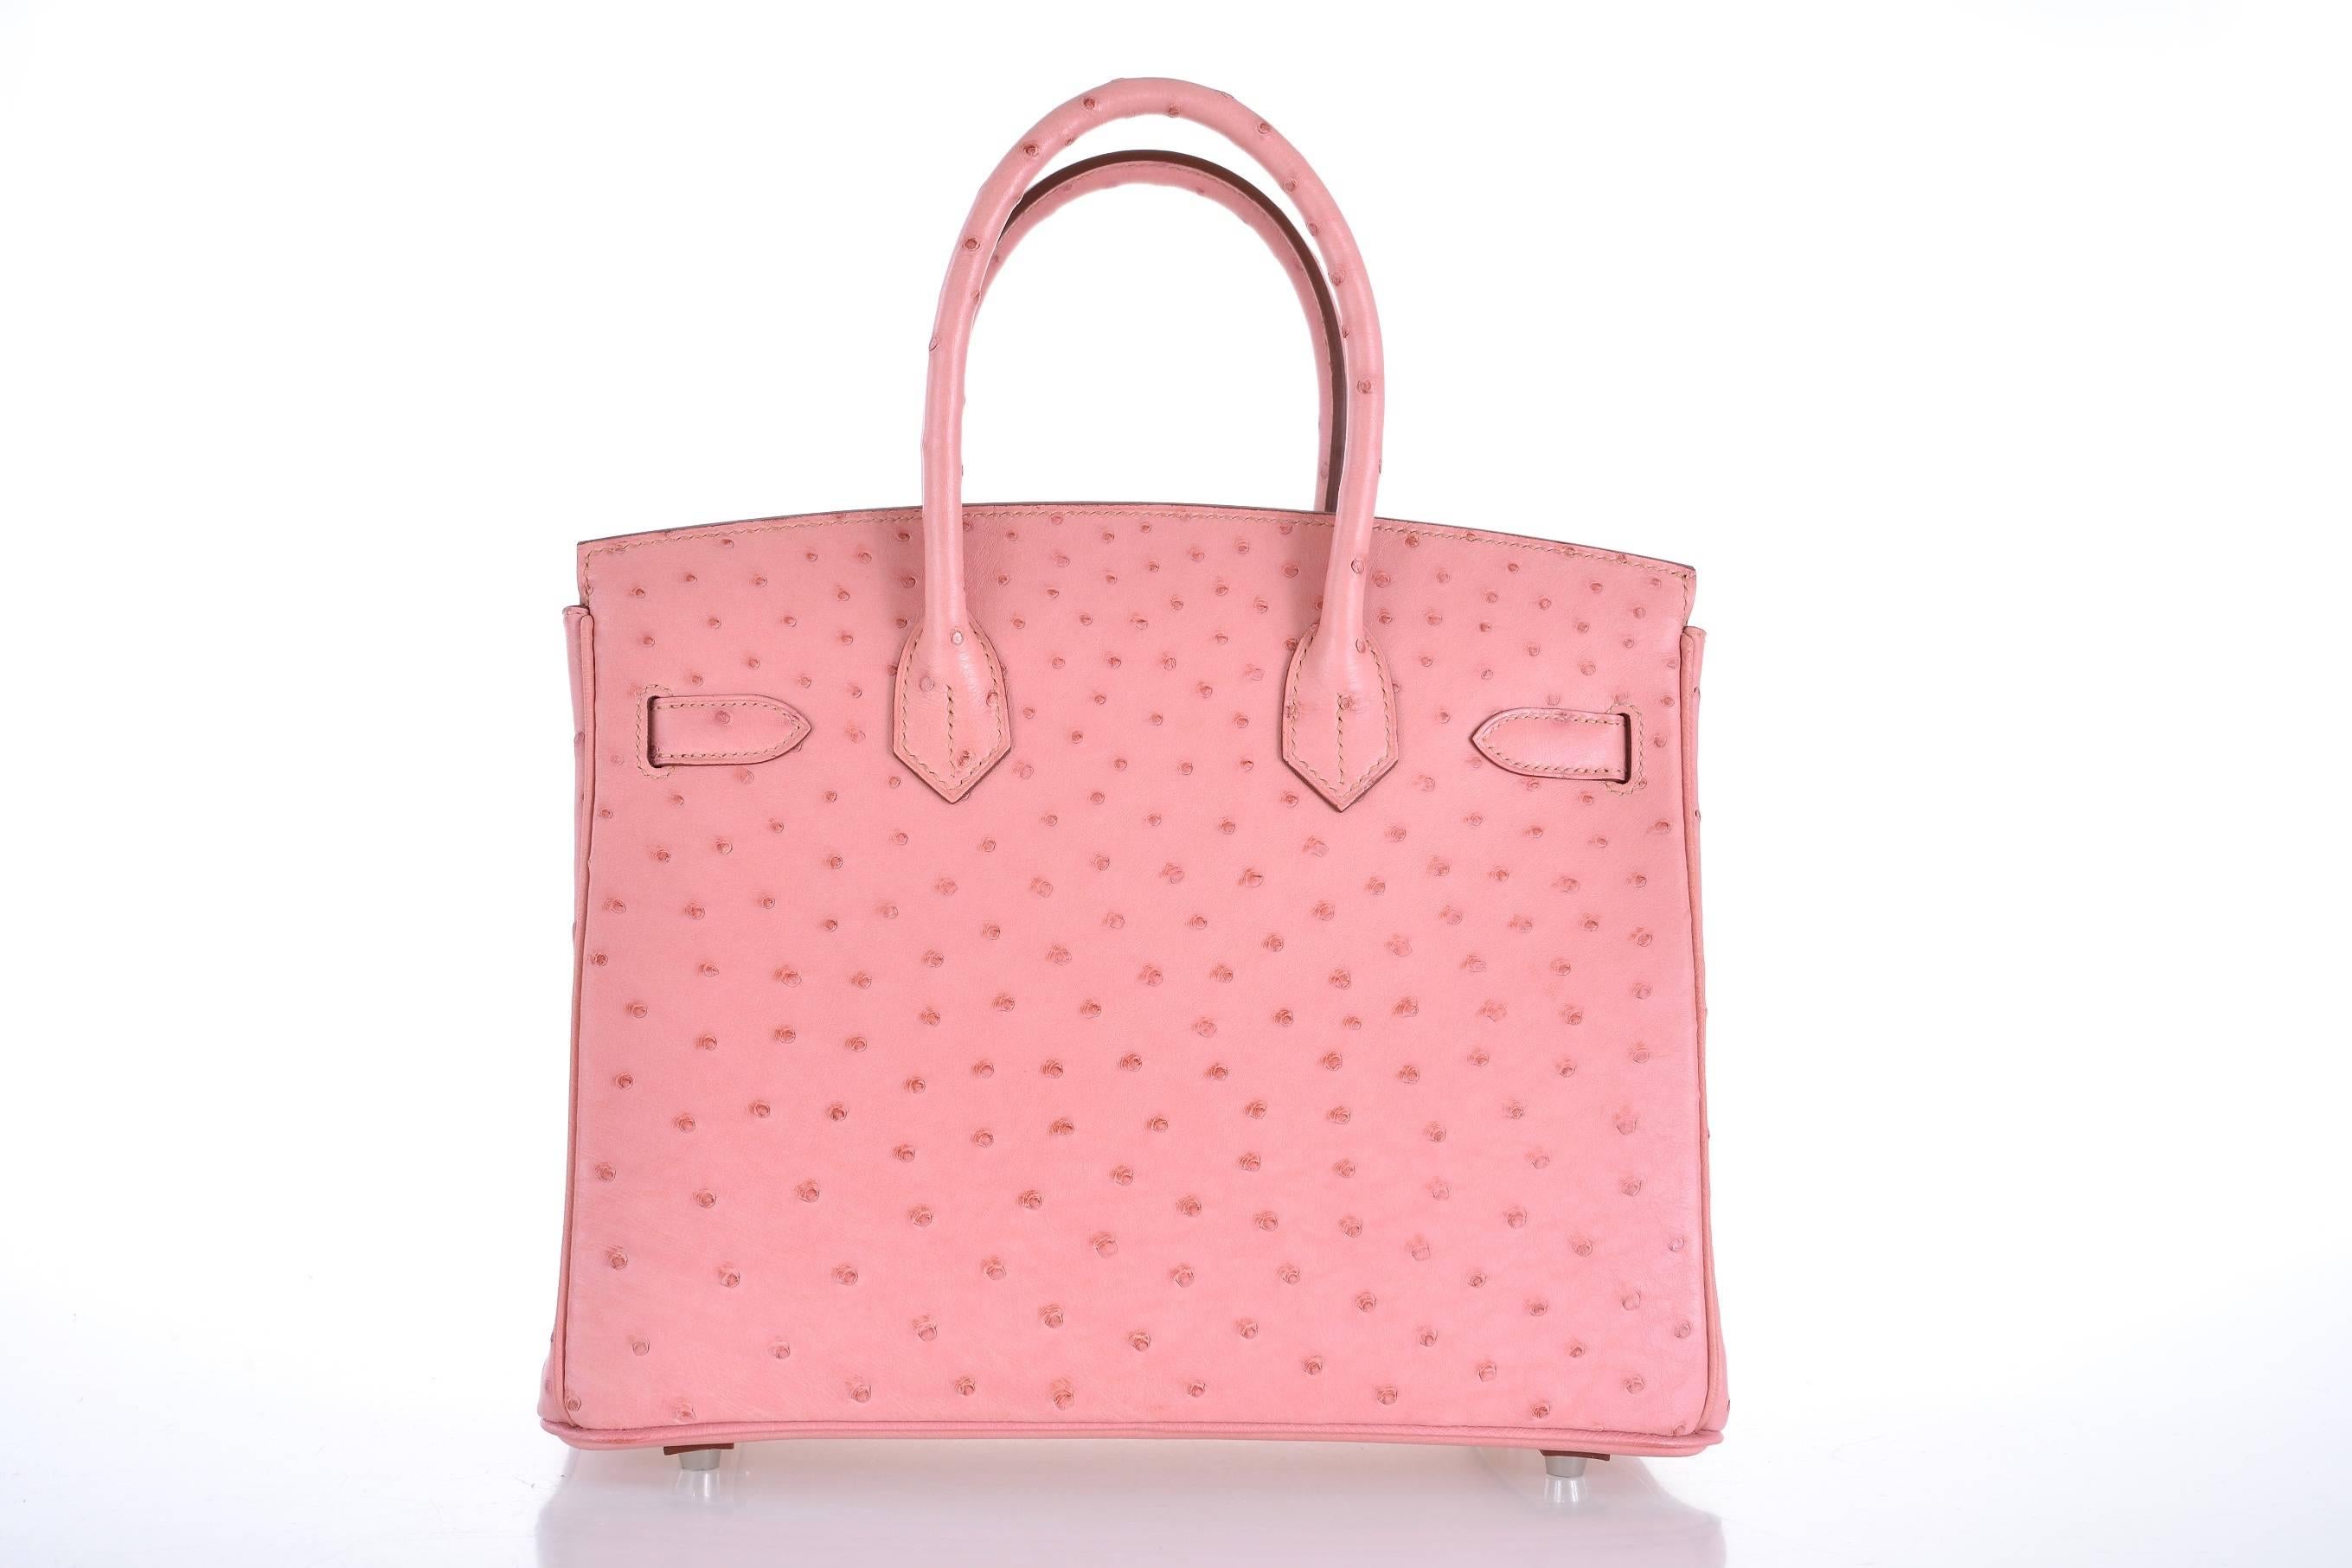 HERMES BIRKIN BAG 30CM OSTRICH TERRE CUITE PINK WITH PALL HARDWARE JaneFinds For Sale 1